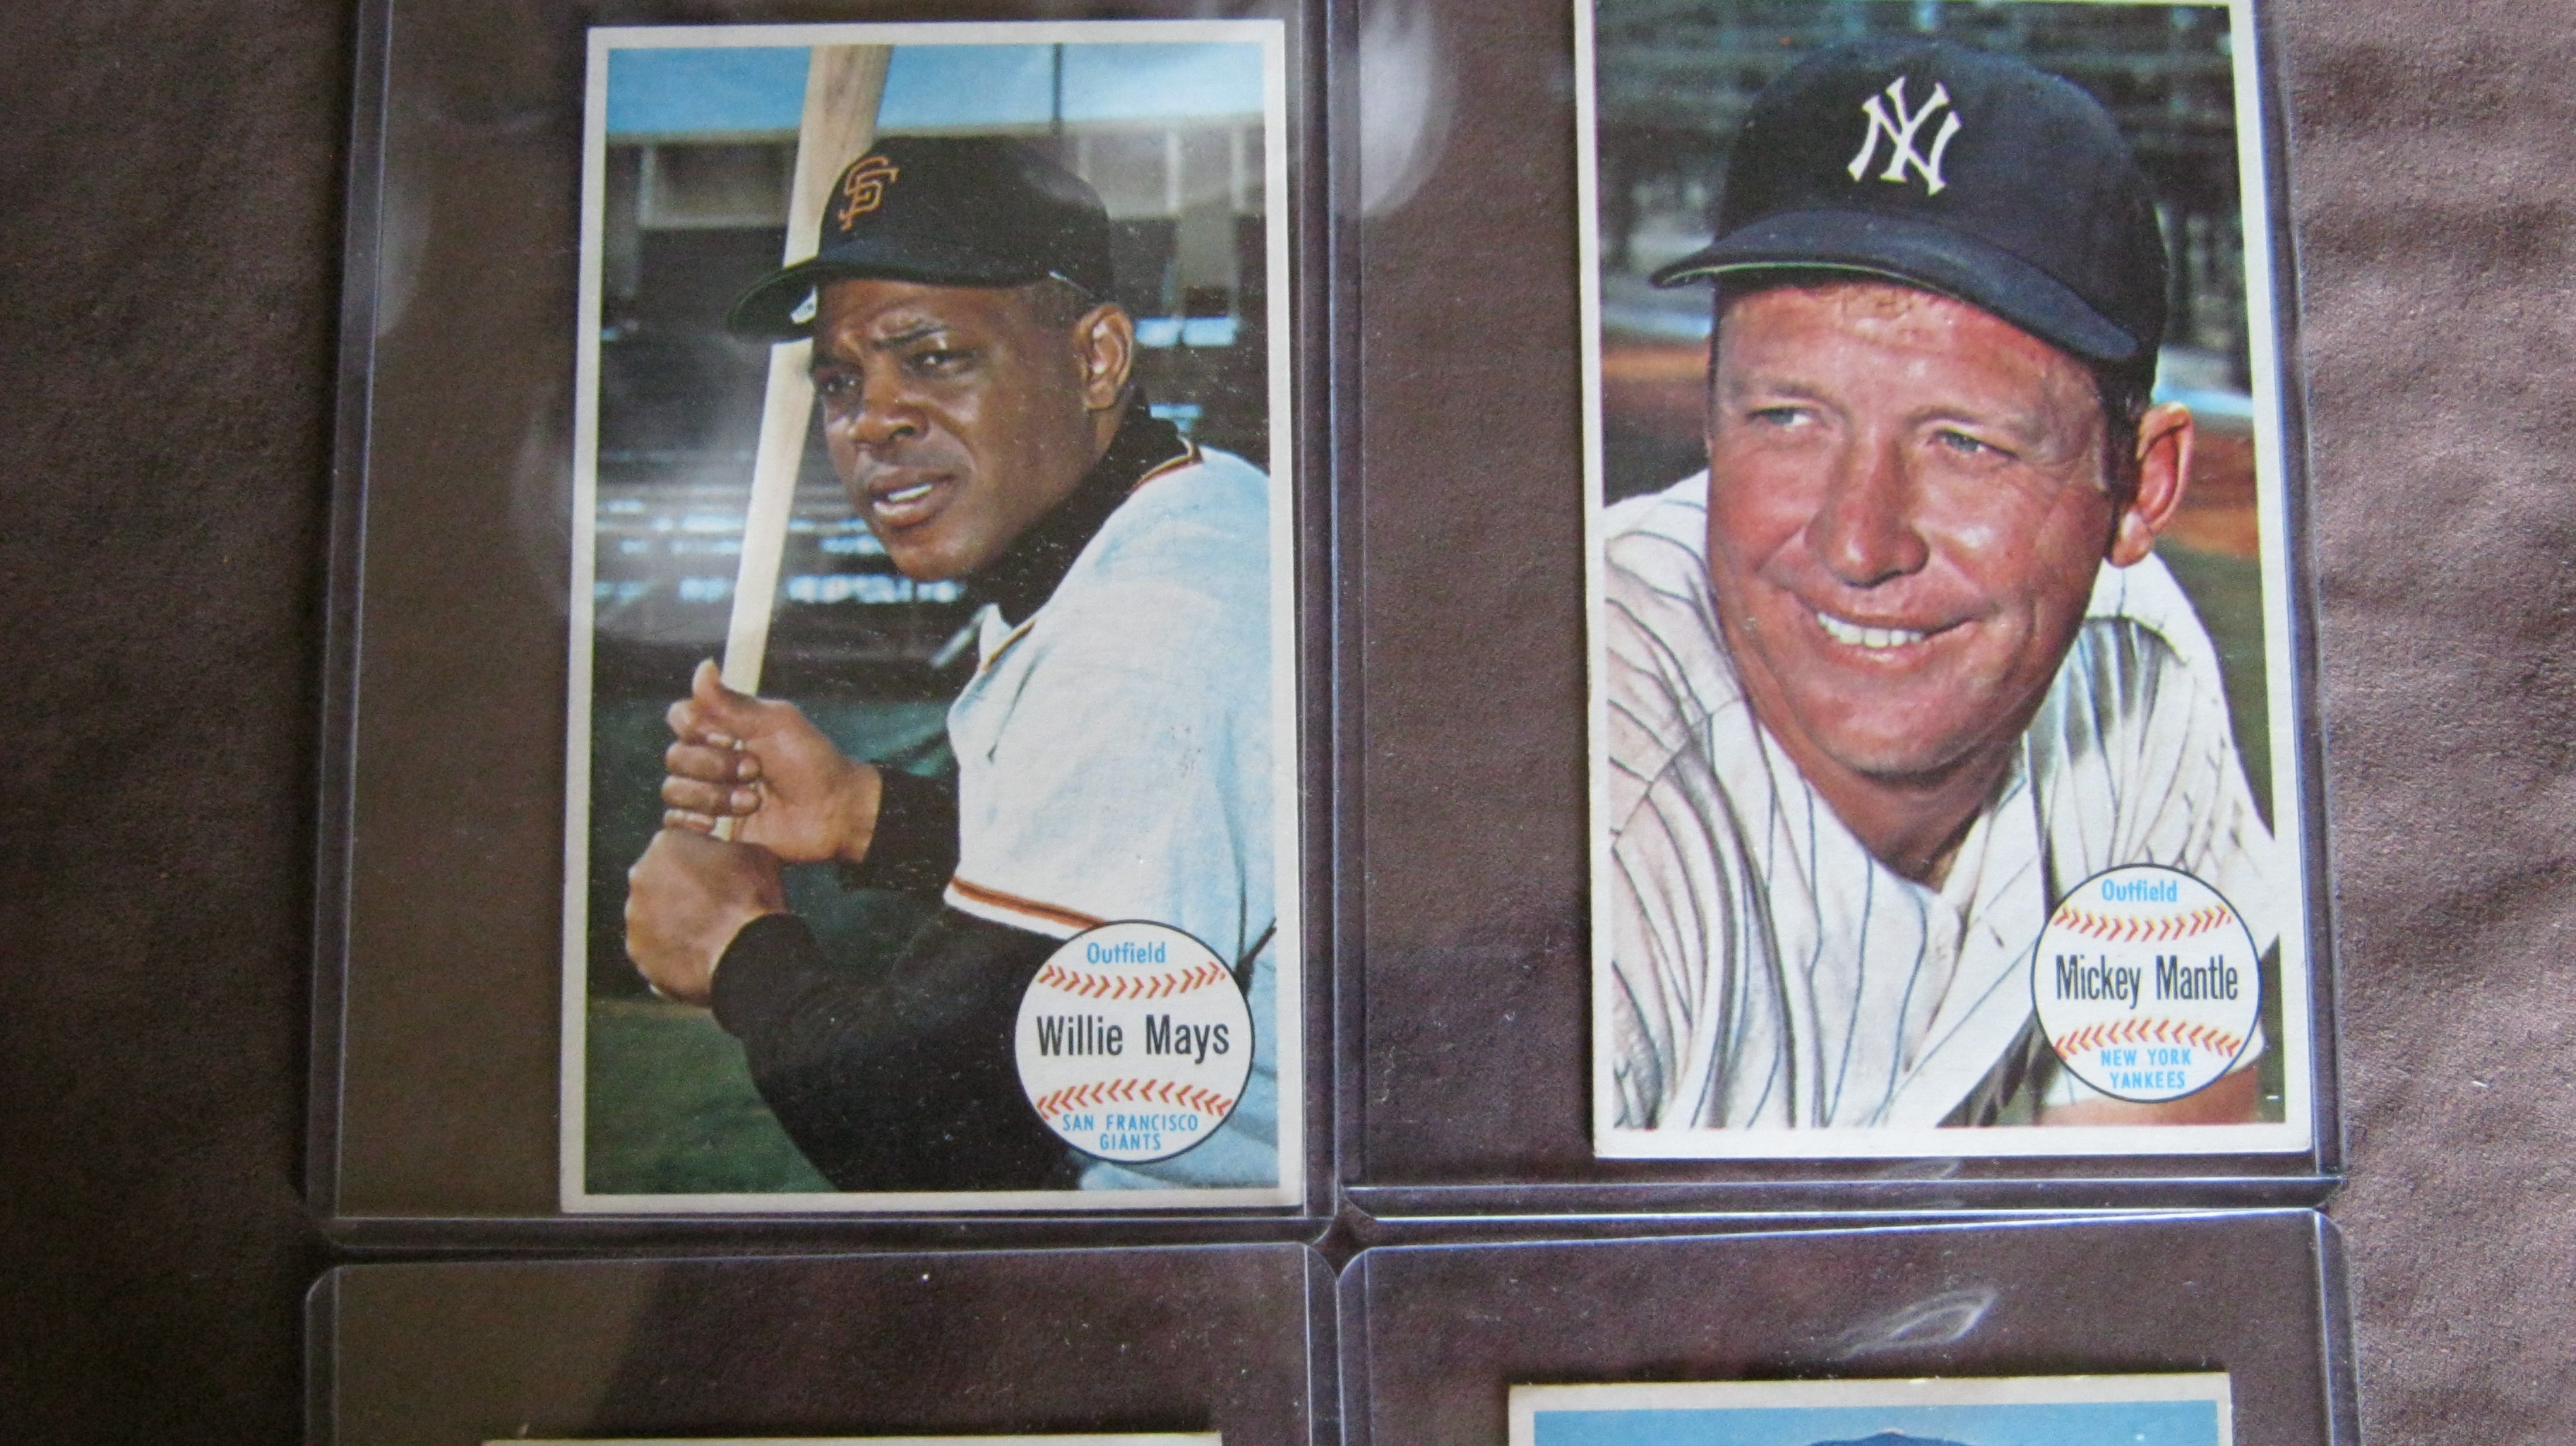 1964 Topps Giants Baseball Card Collection - Sold For $265.00! - Carol